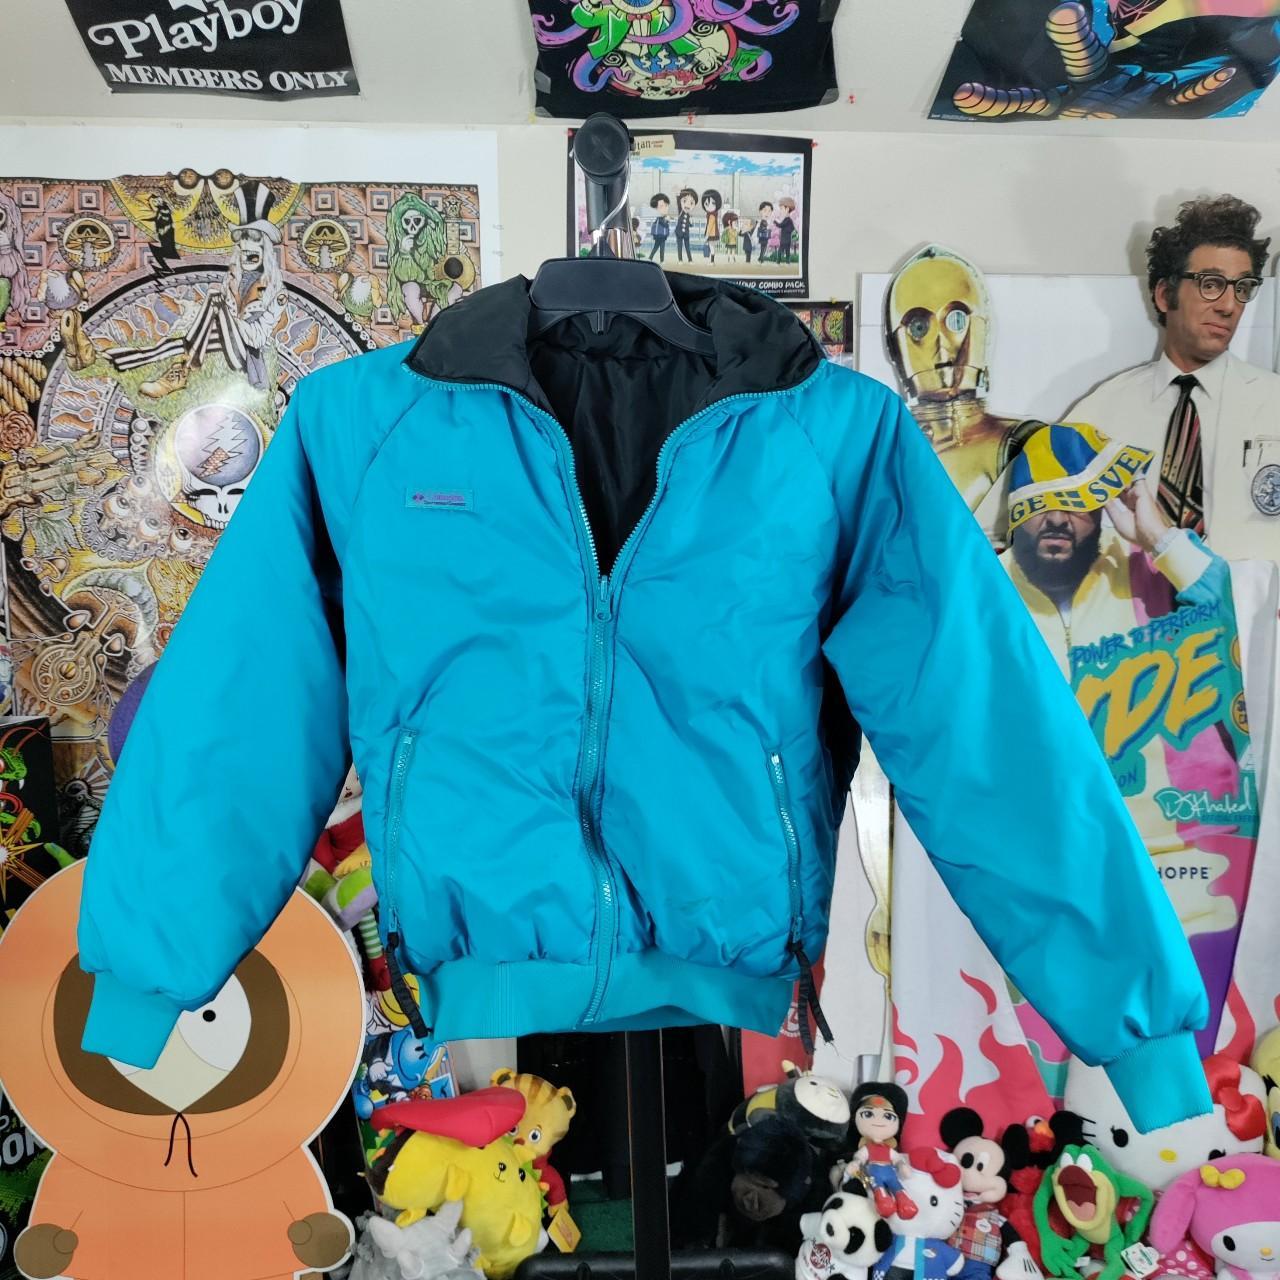 Columbia jacket 🧥 Small 23x24 Small blemishes marks - Depop